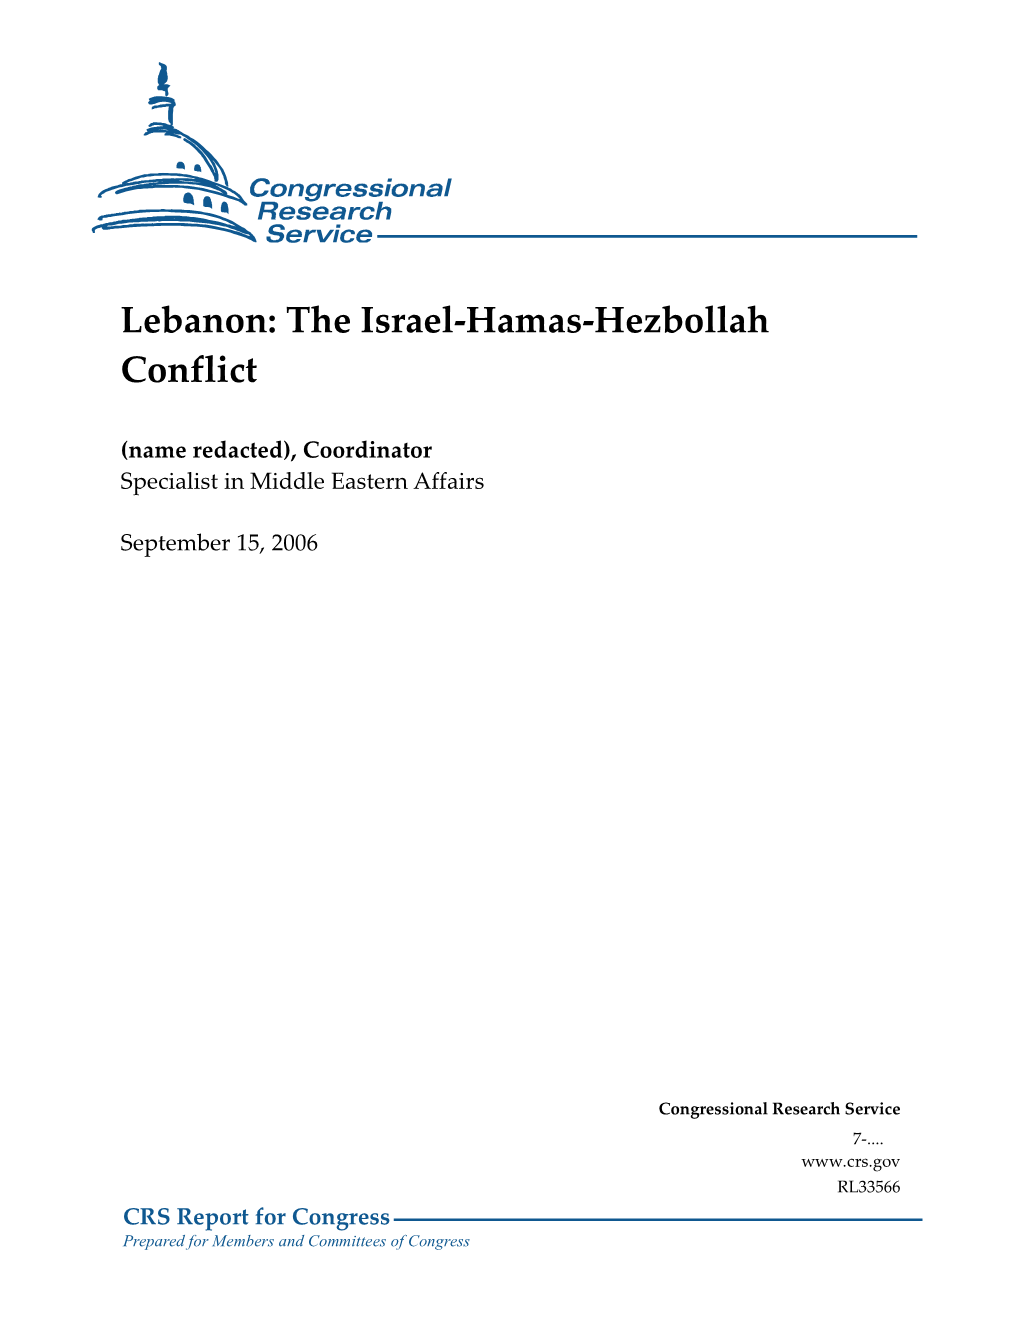 The Israel-Hamas-Hezbollah Conflict